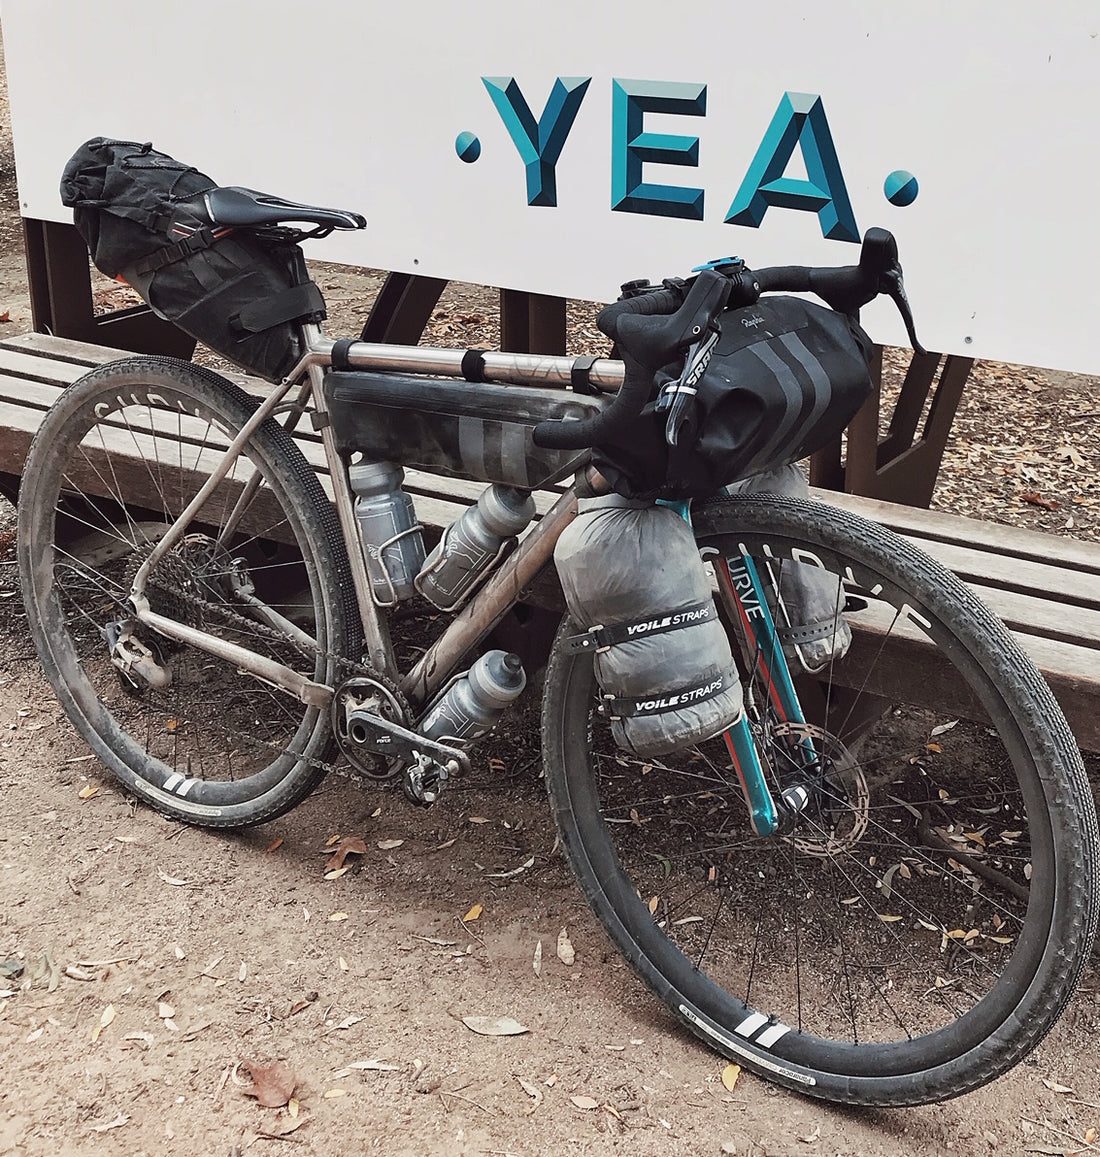 Bike-packing Fails: a self-depreciating account of learning the hard way by Kasper Voogt